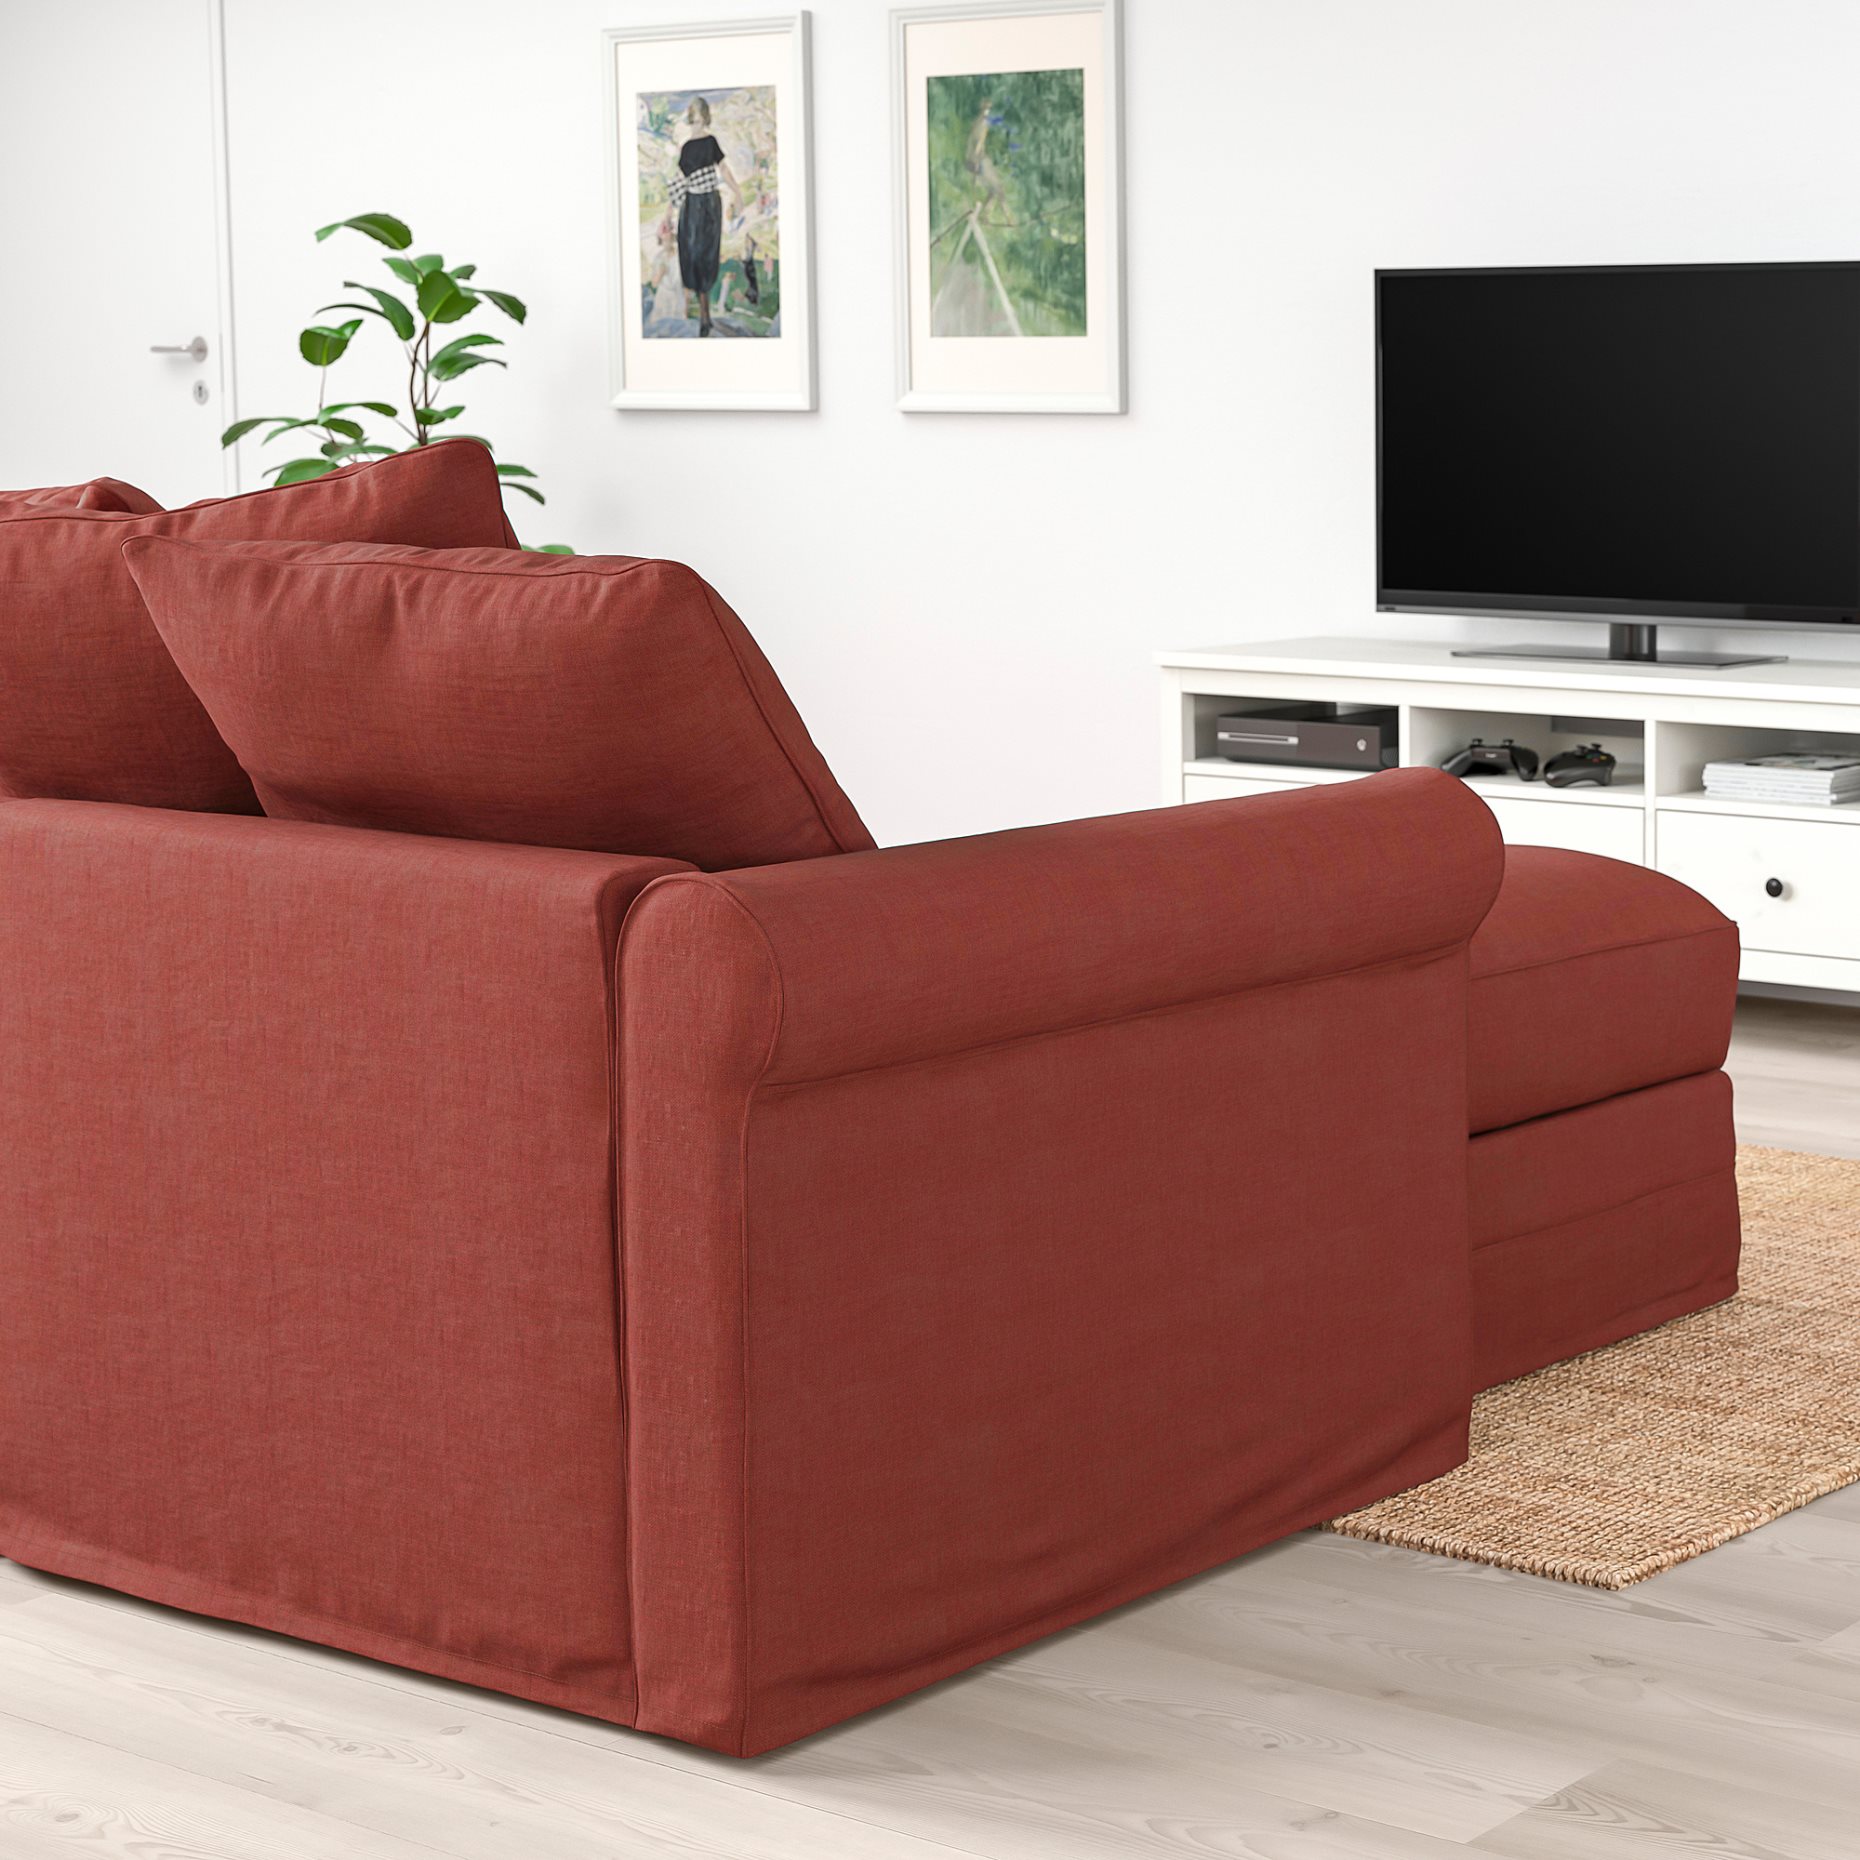 GRÖNLID, 3-seat sofa with chaise longue, 294.089.75